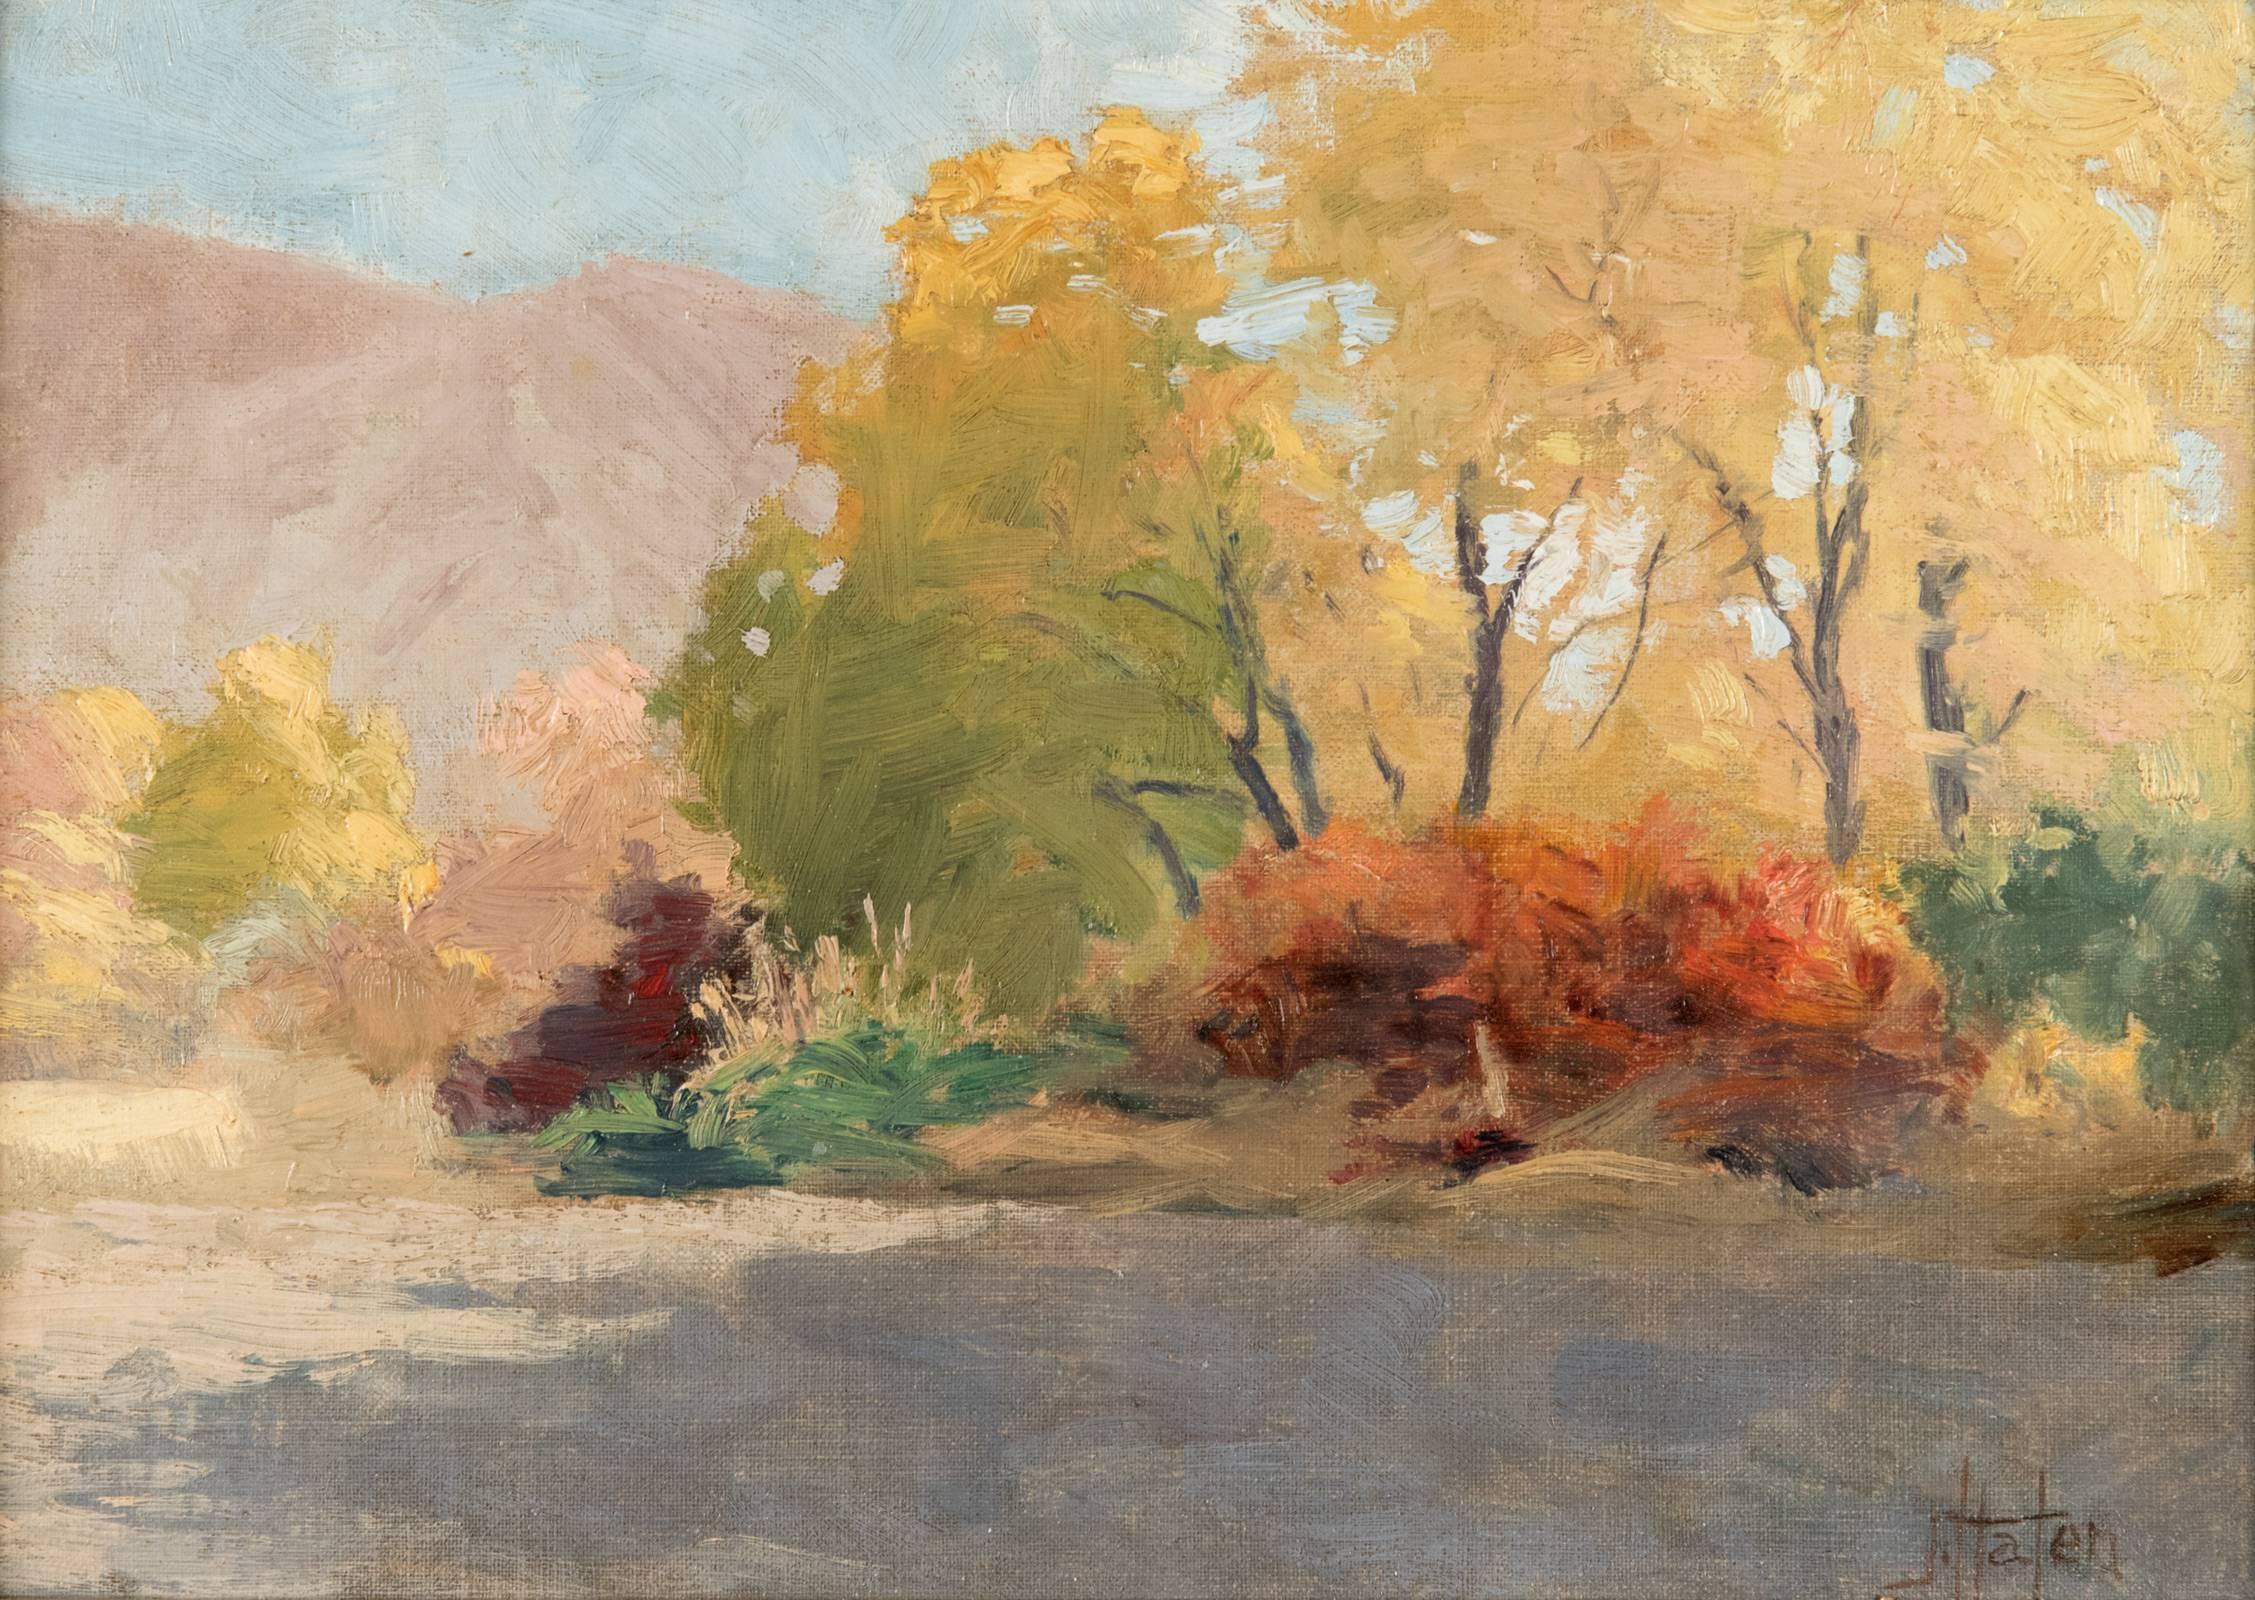 In this landscape sketch cool shadows creep across the foreground of the painting, laid in juxtaposition to the autumnal palette that depicts the trees and shrubbery at the edge of forest, while a neutral mountain range looms in the background. The